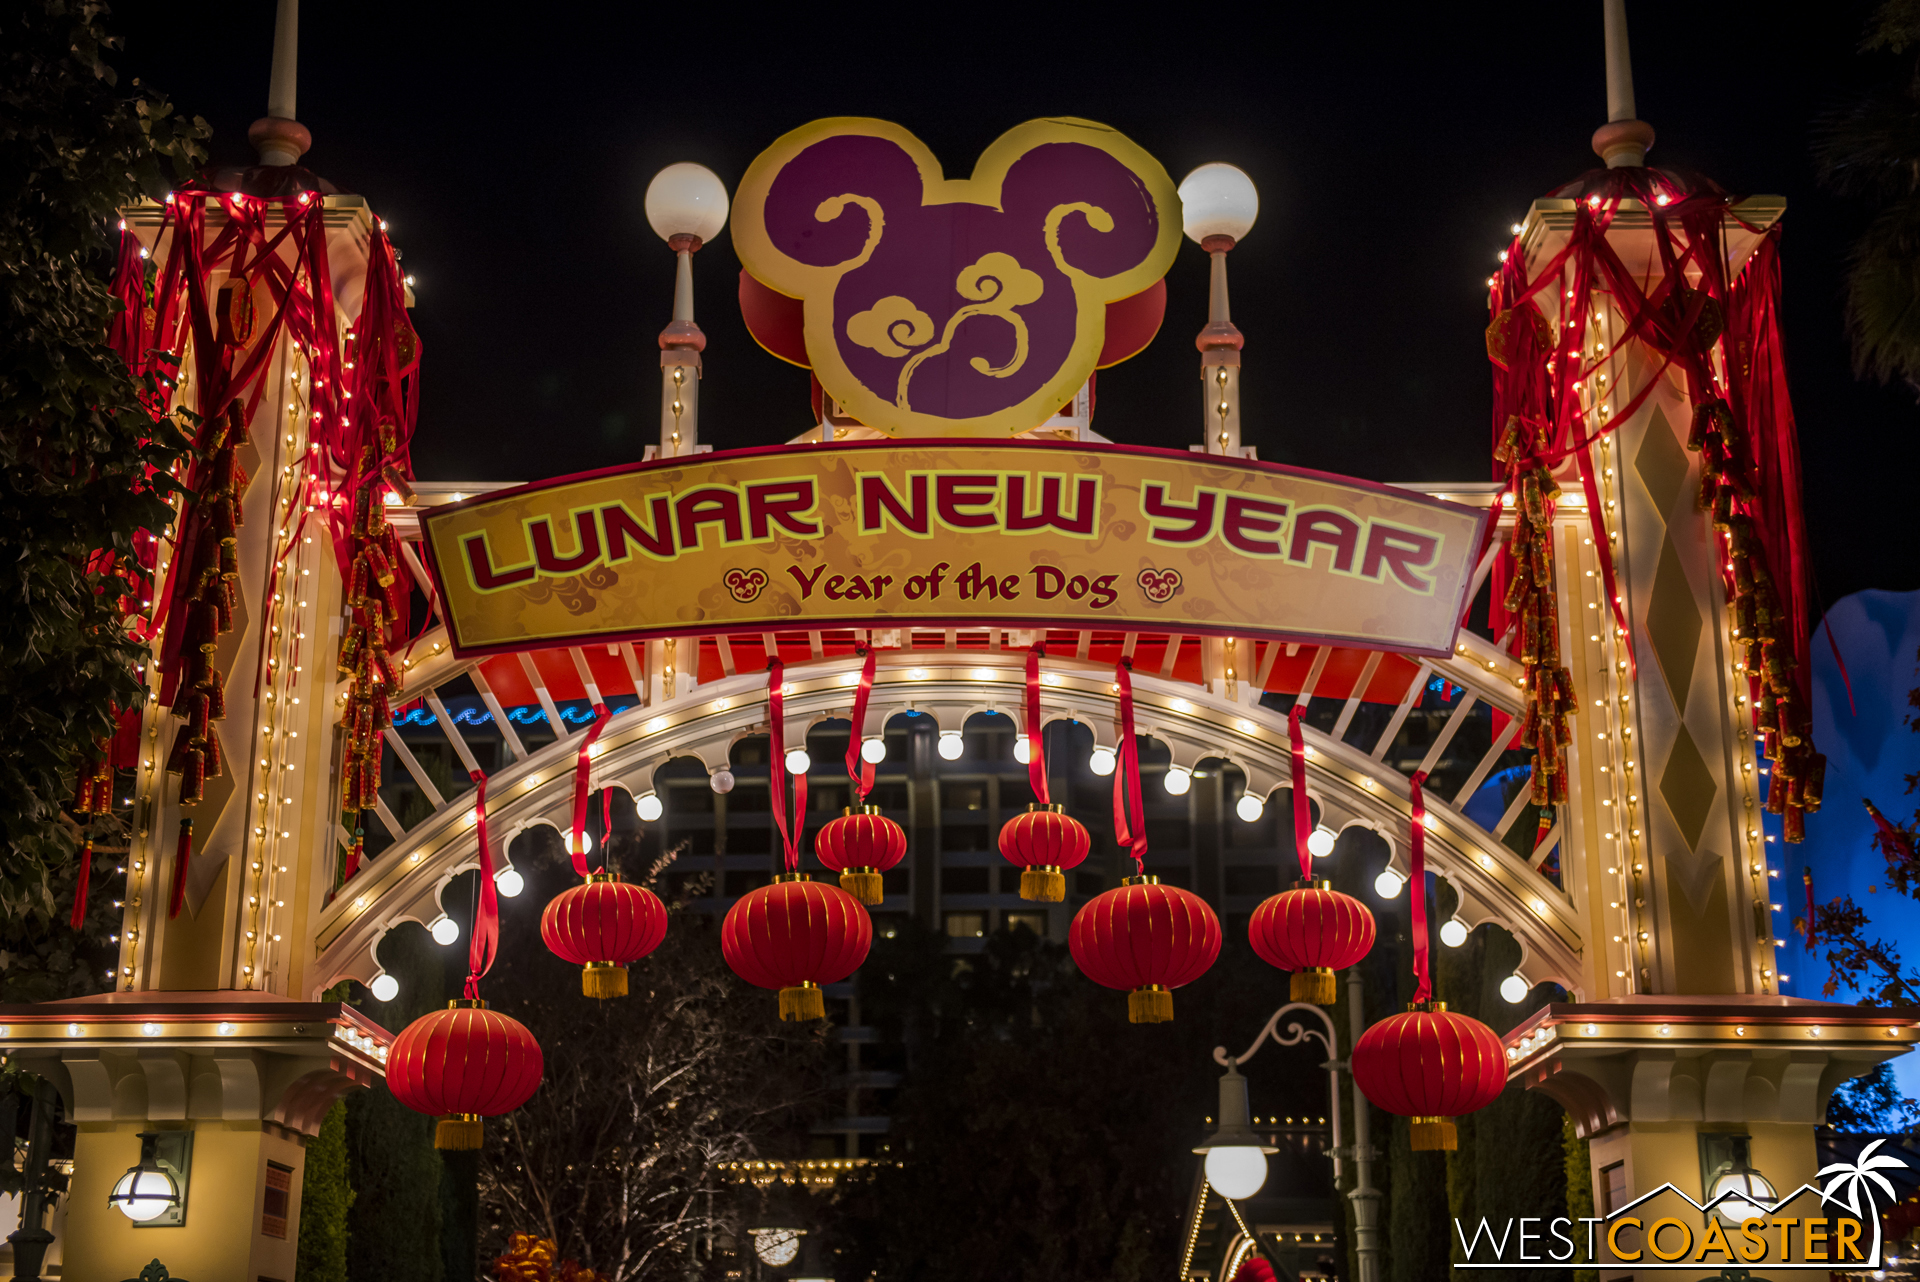  Happy year of the dog!&nbsp; The actual Lunar New Year falls on Friday, February 16 this year. 